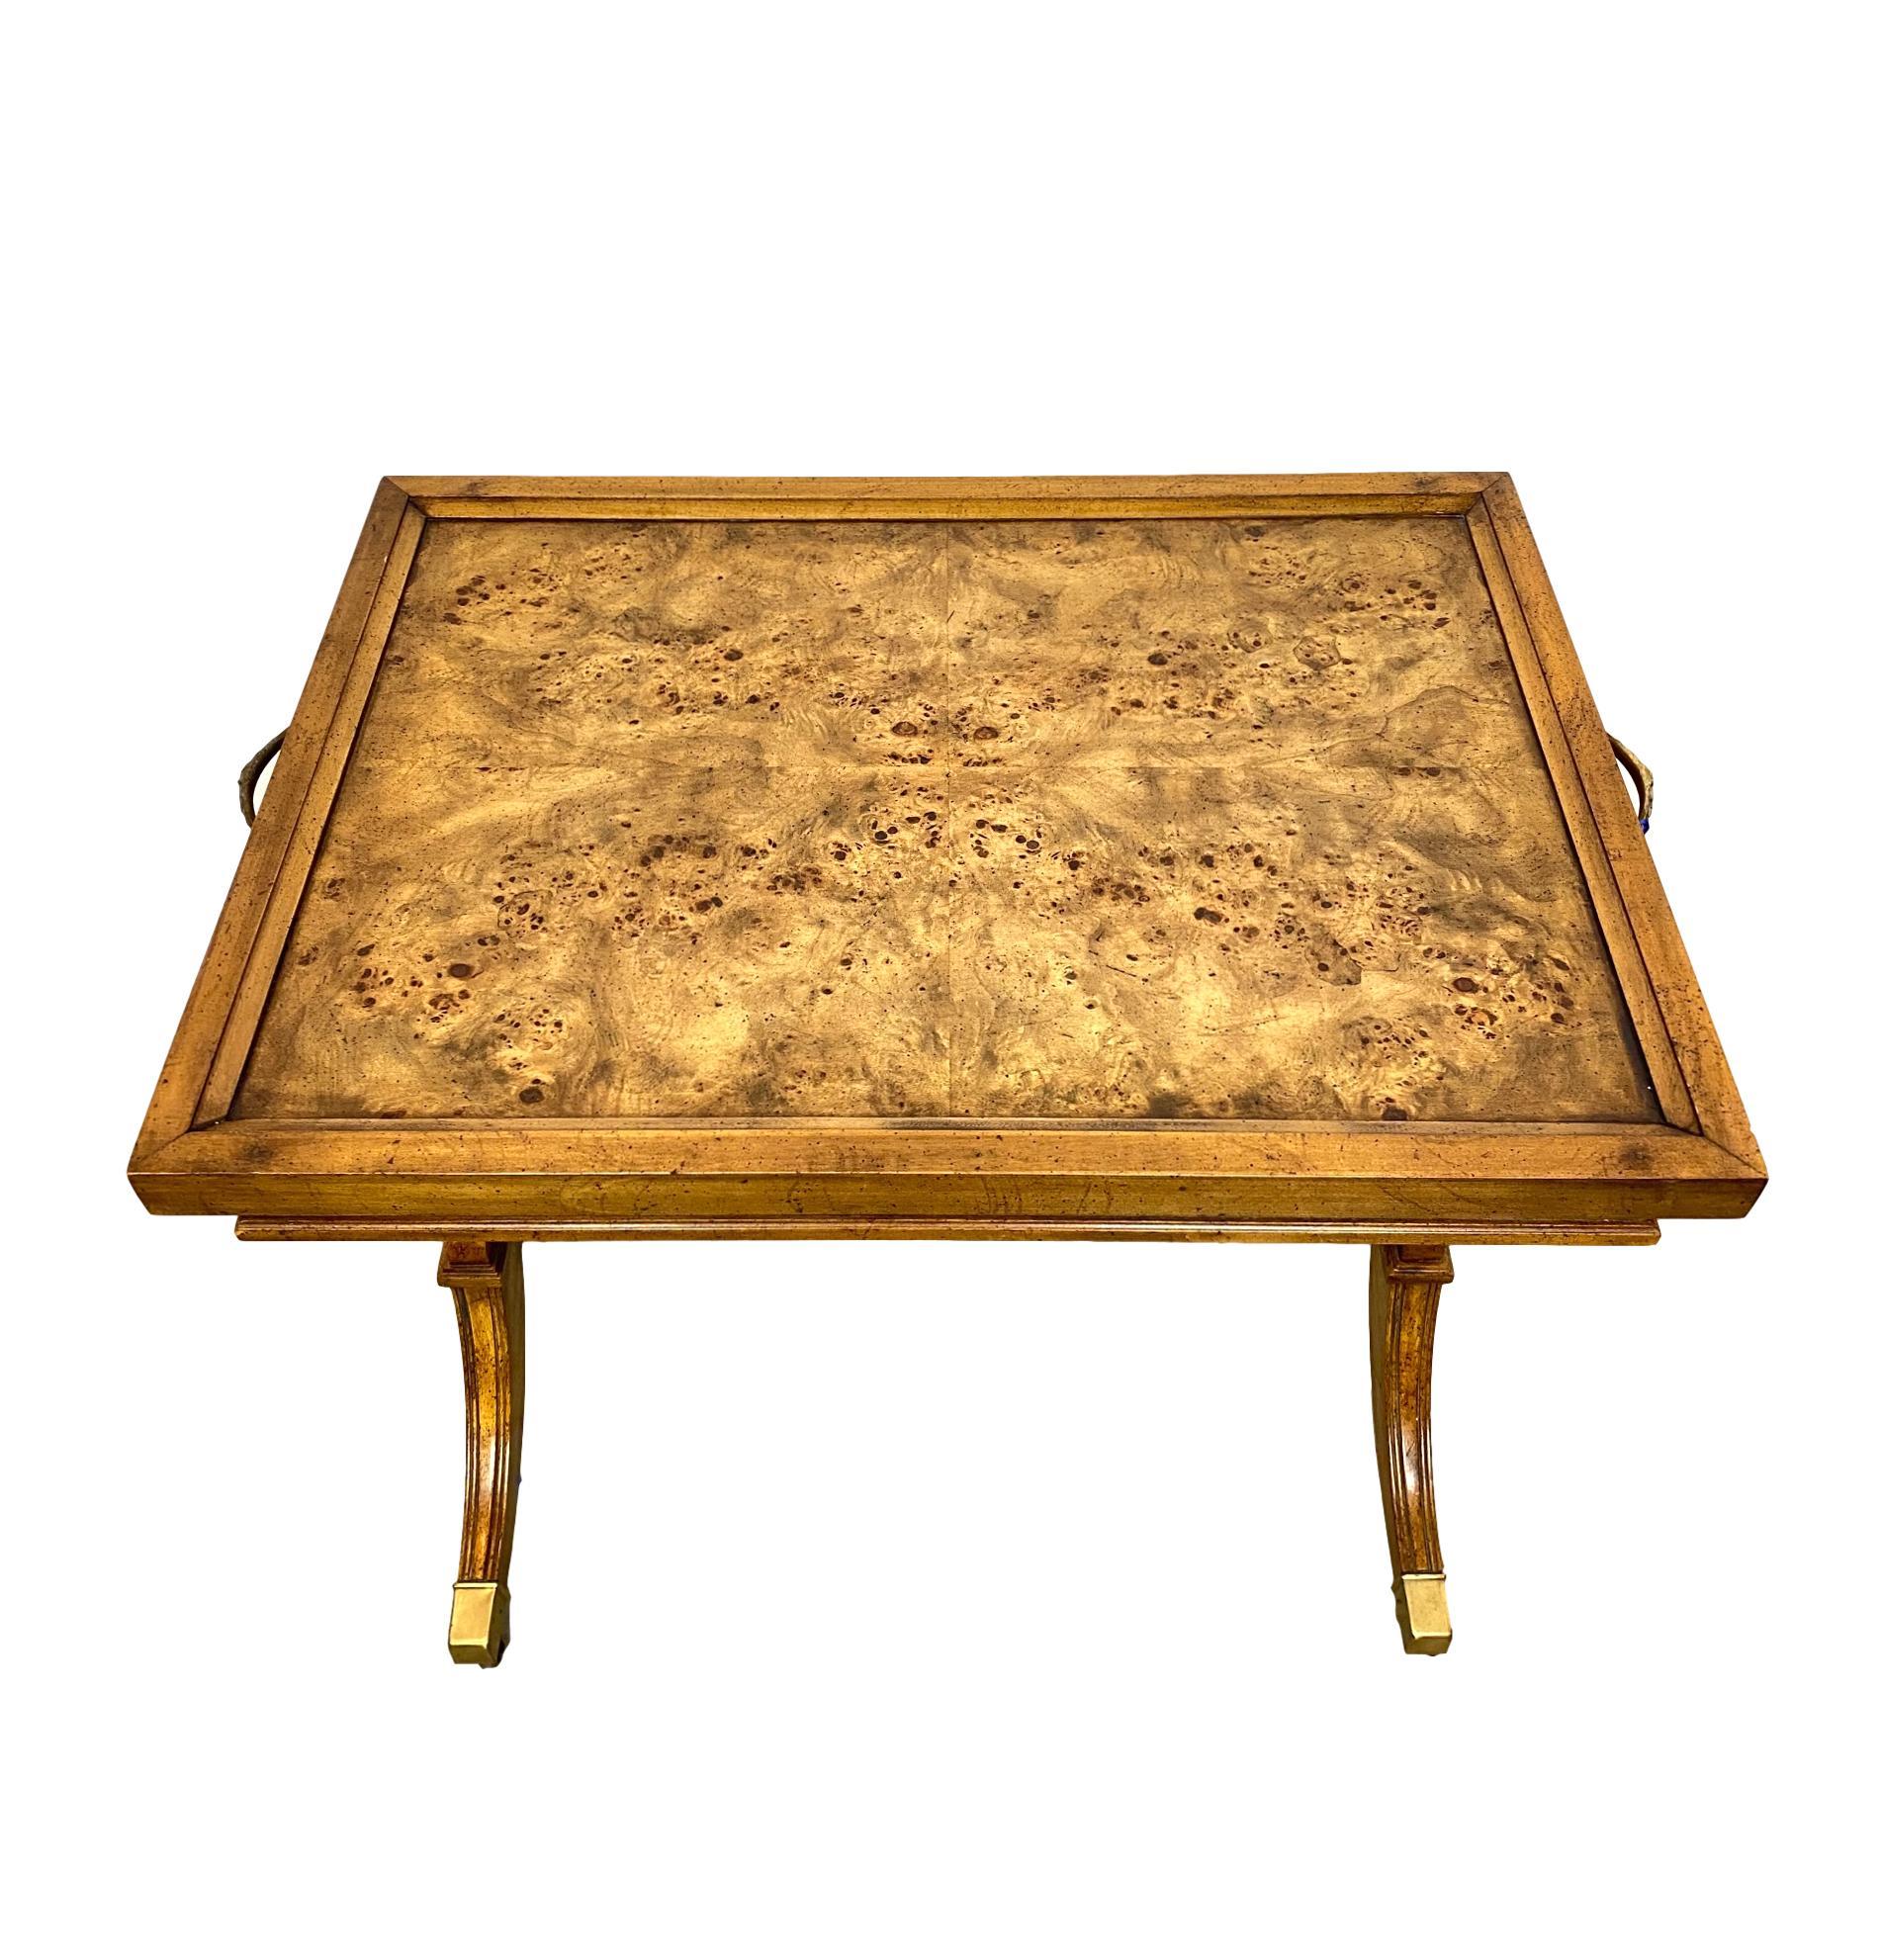 Regency Walnut Convertible Inlaid Chess Table/Tea Table with Backgammon Board Interior